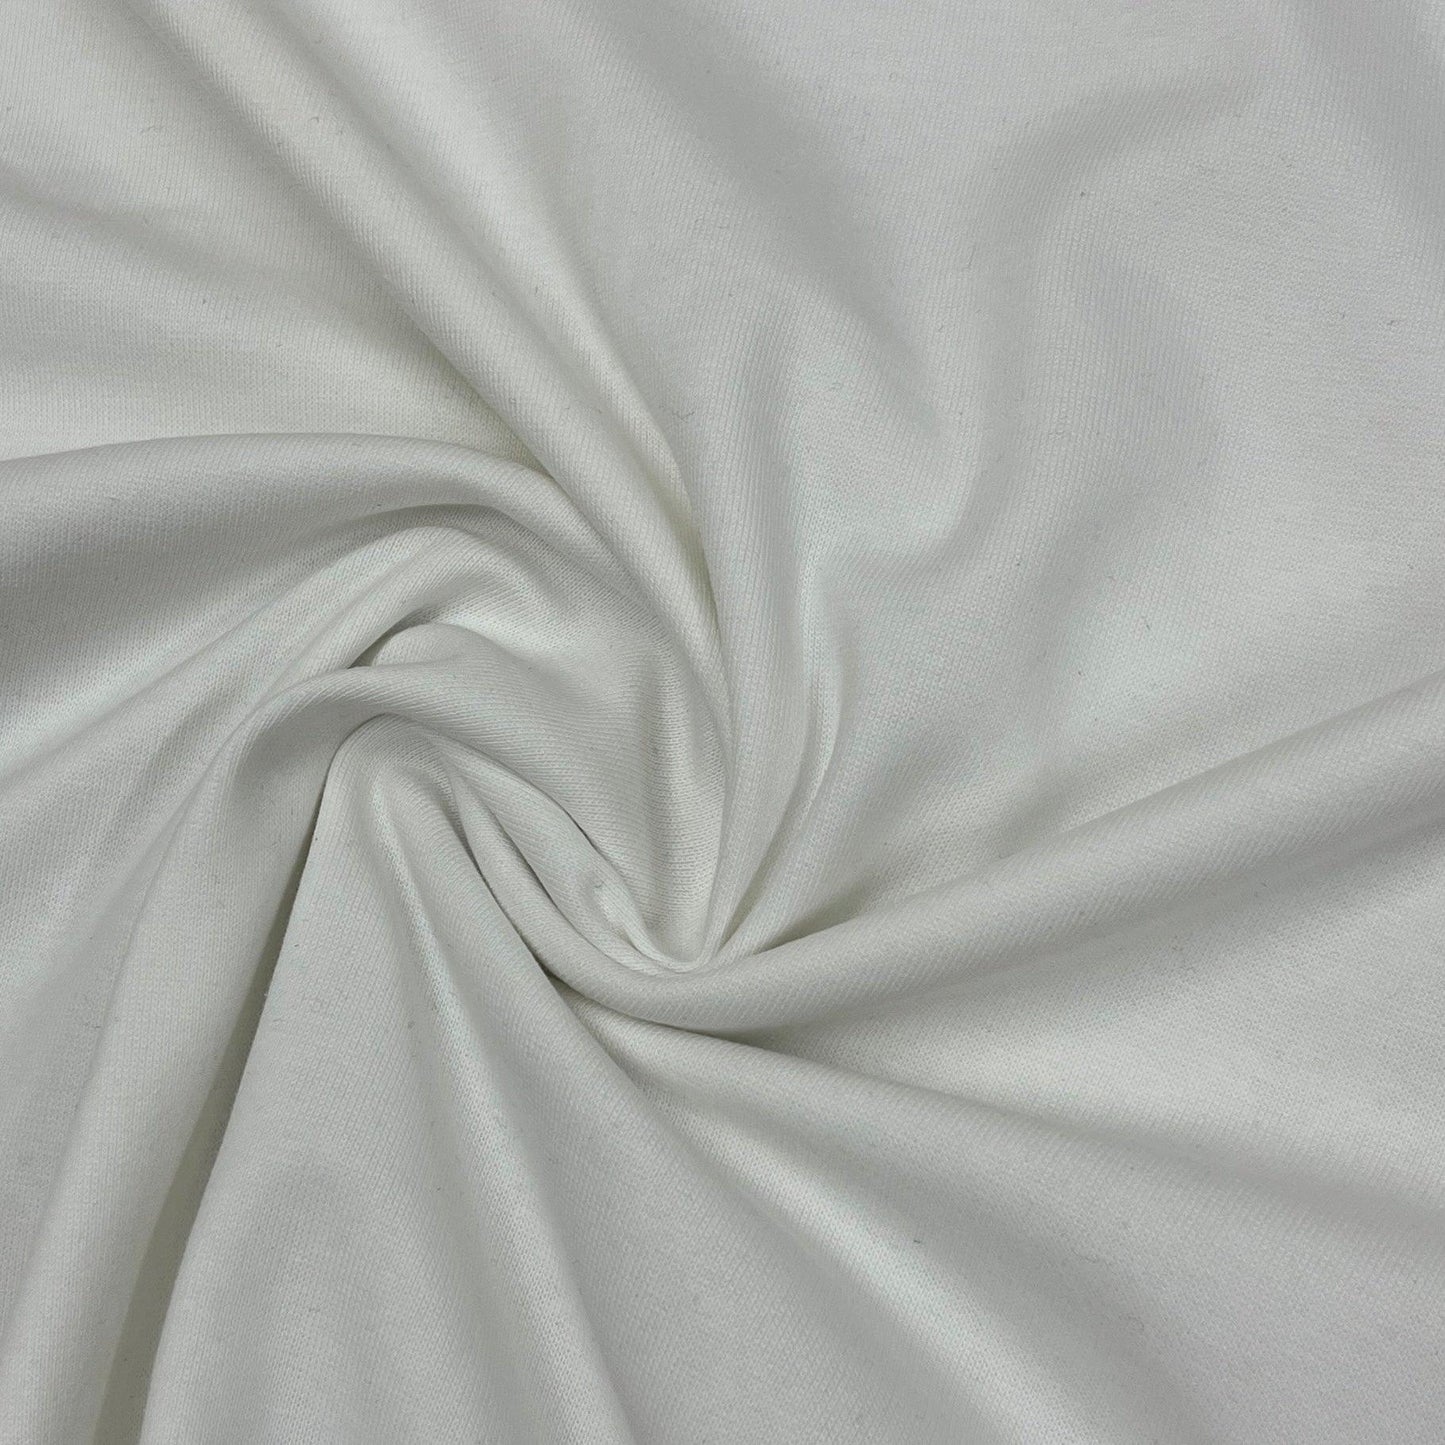 Heavy Off-White Organic Cotton Rib Knit Fabric - Grown in the USA - 54" wide - Nature's Fabrics